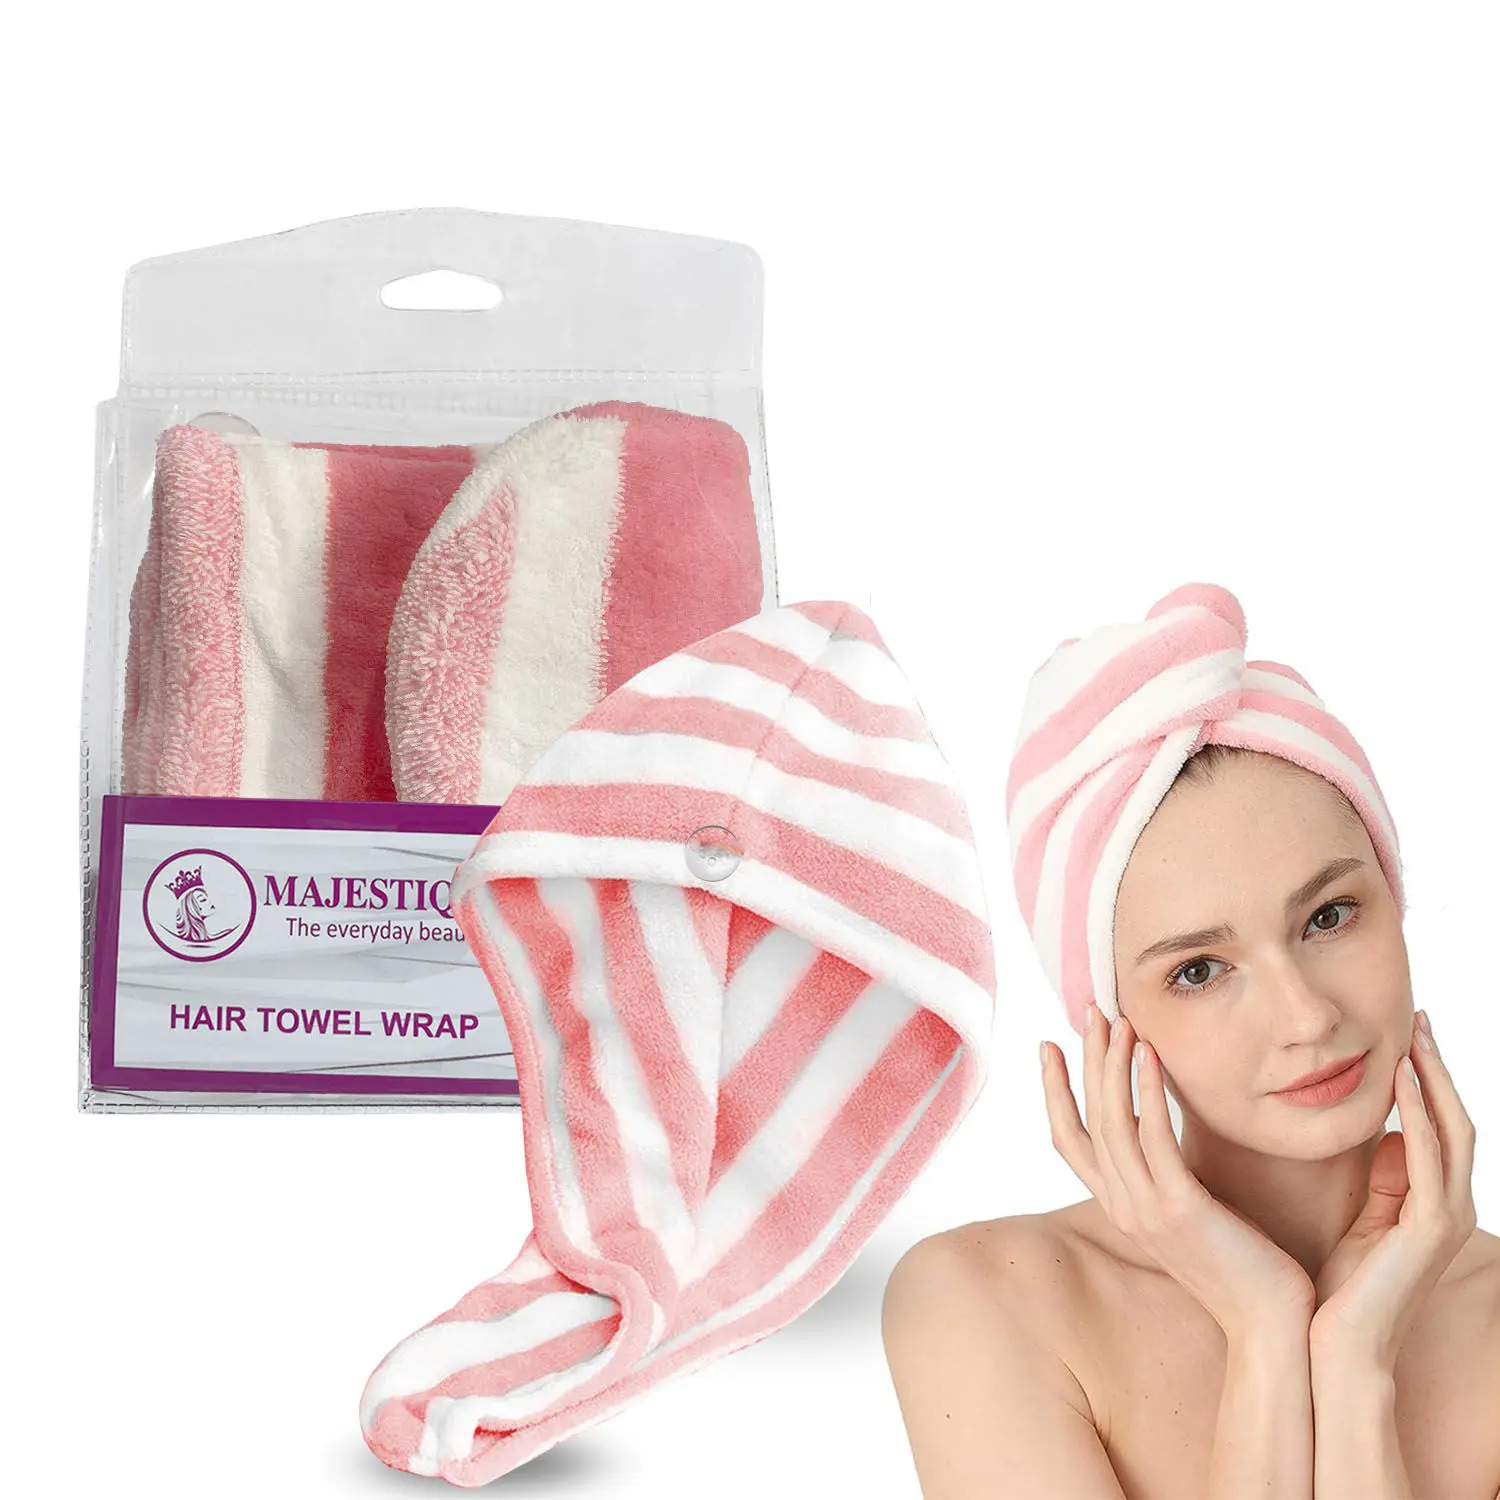 Majestique Quick Hair Towel Wrap Turban for Curly, Long, and Thick Hair BA211- Men and Women - Color May Vary